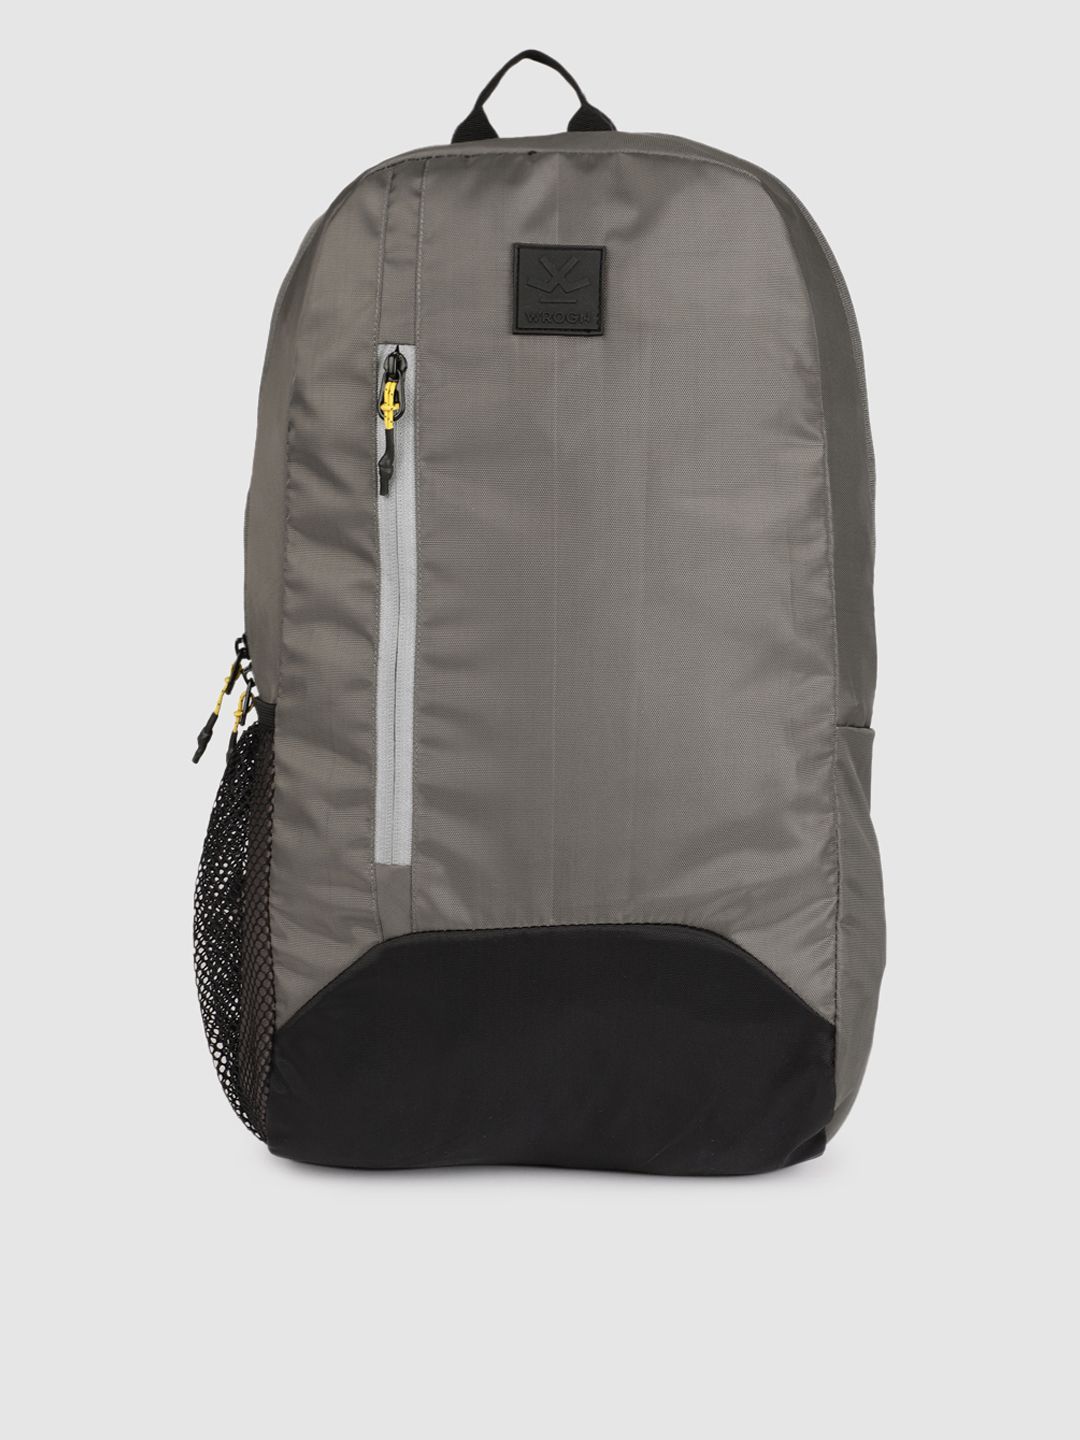 WROGN Unisex Grey & Black Colourblocked Pyramid Backpack Price in India